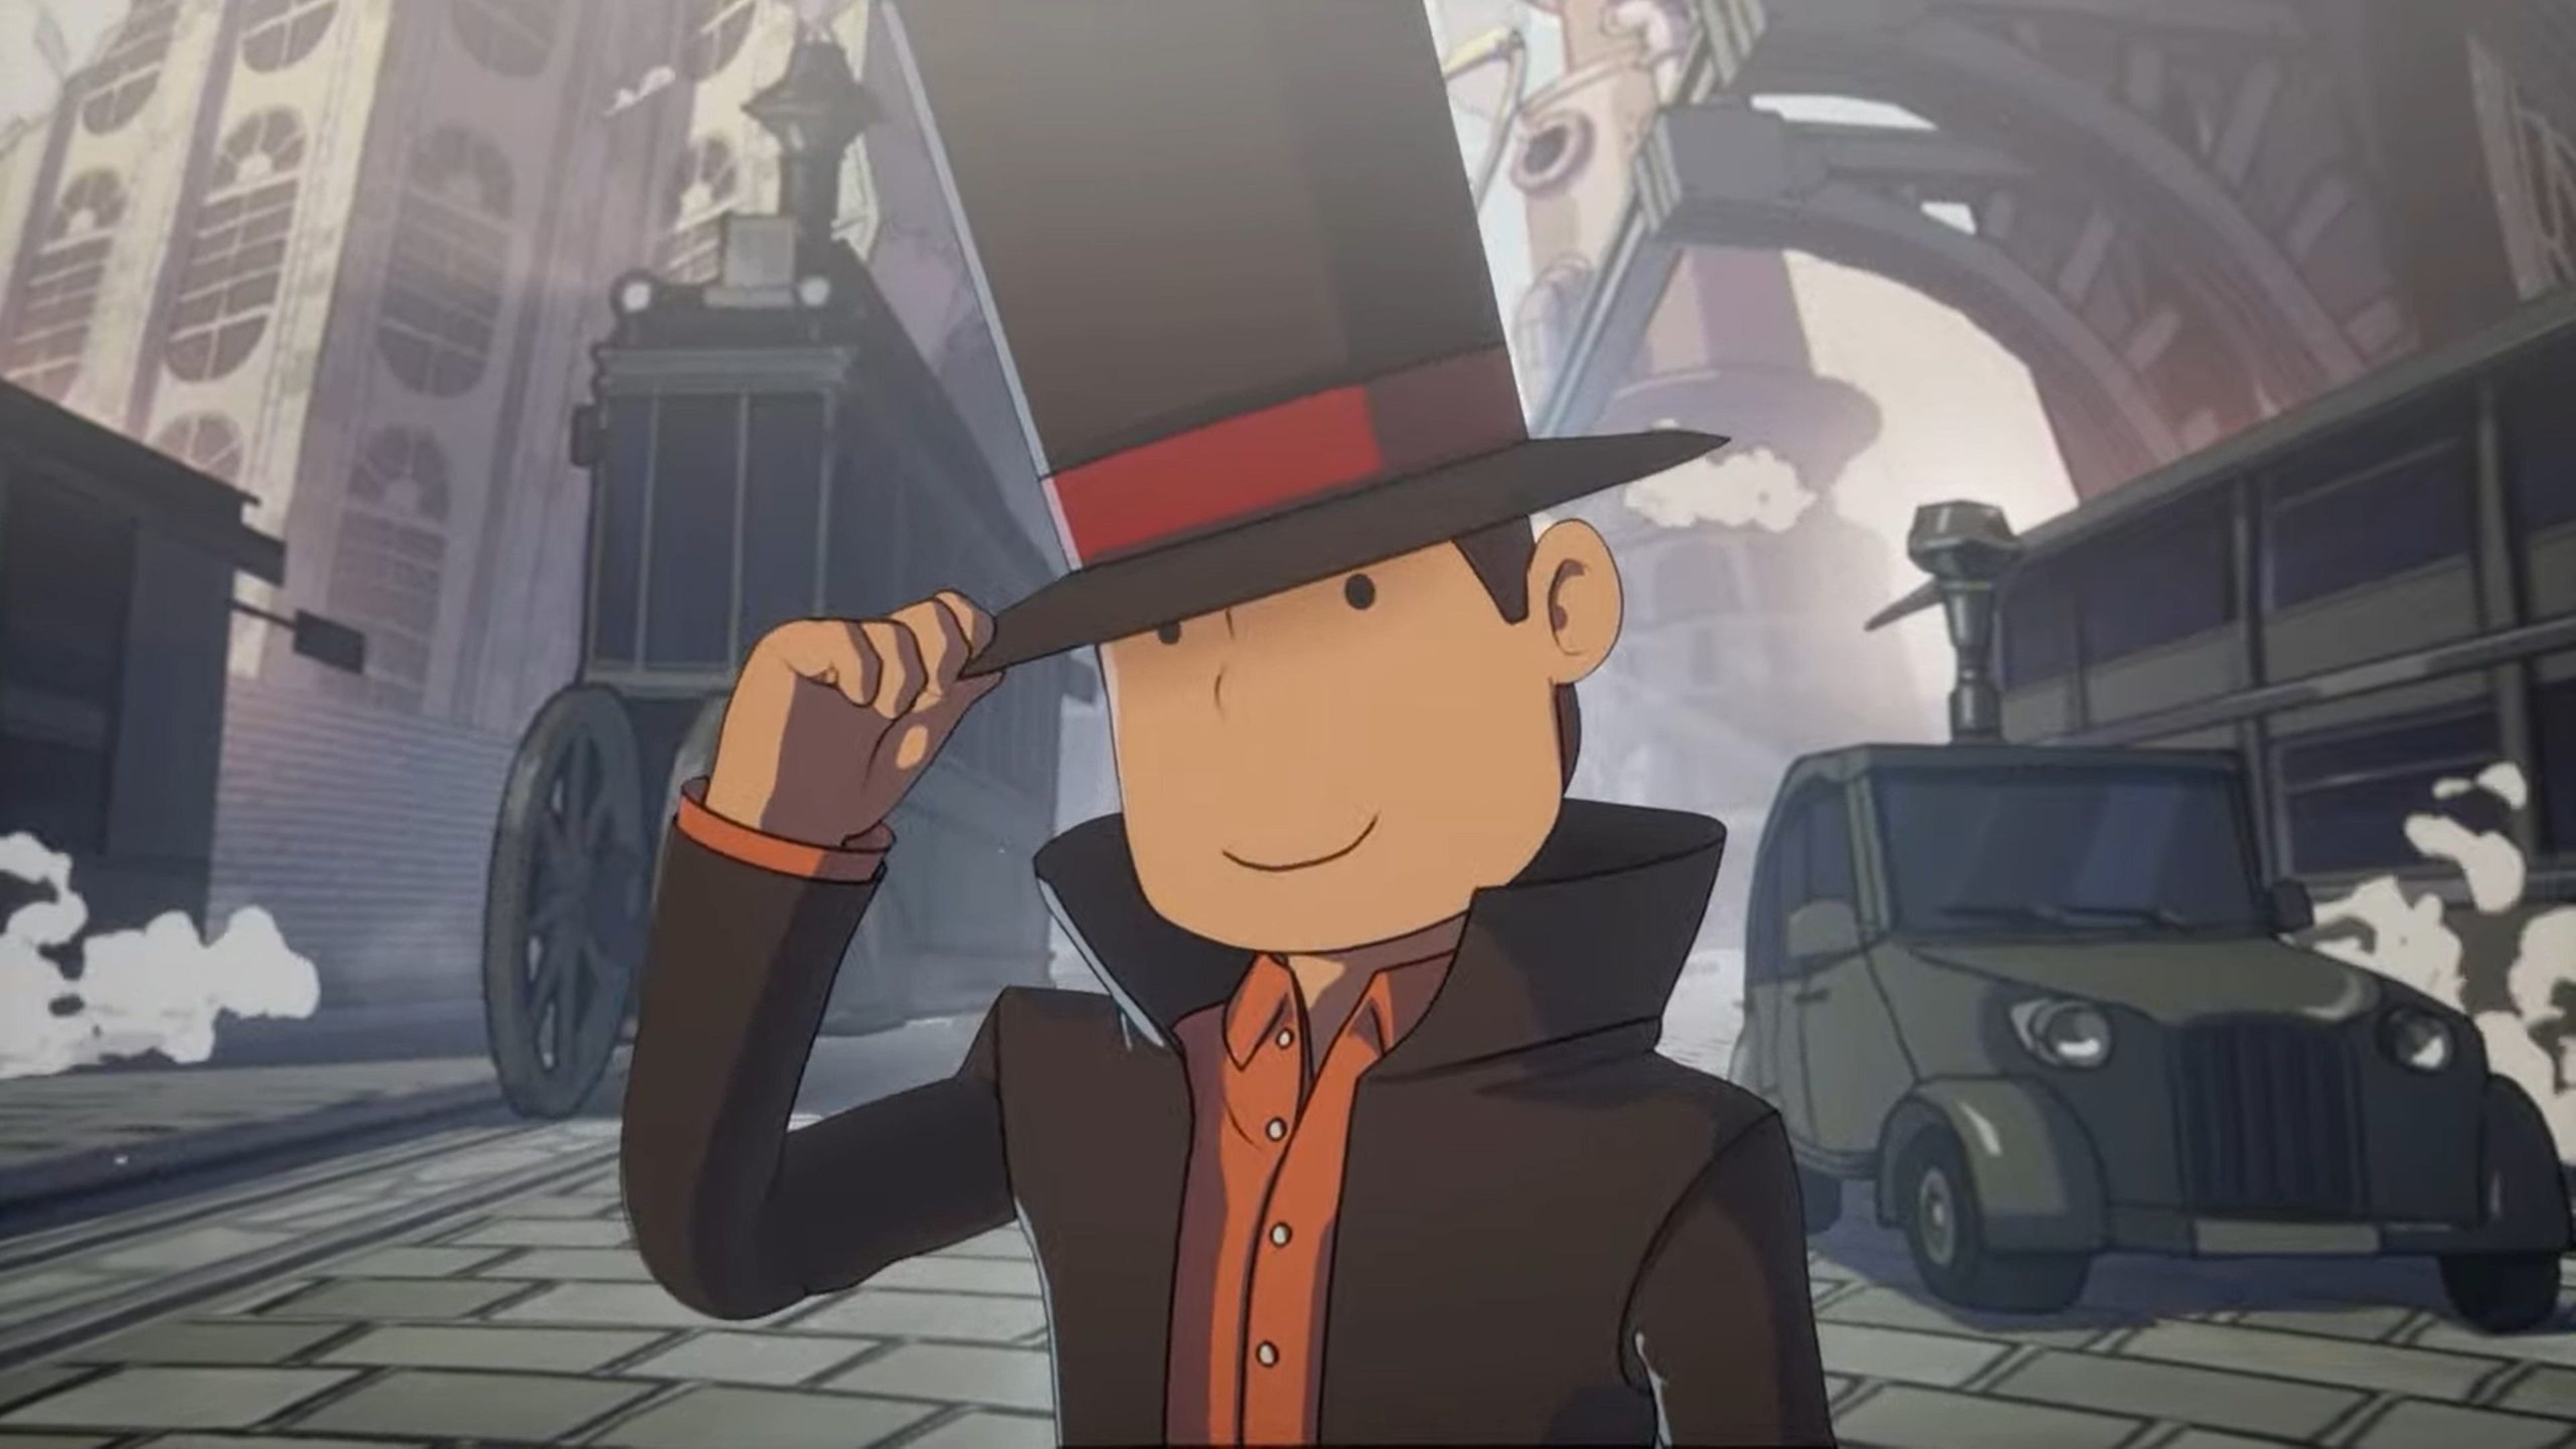 Professor Layton and the new world of steam